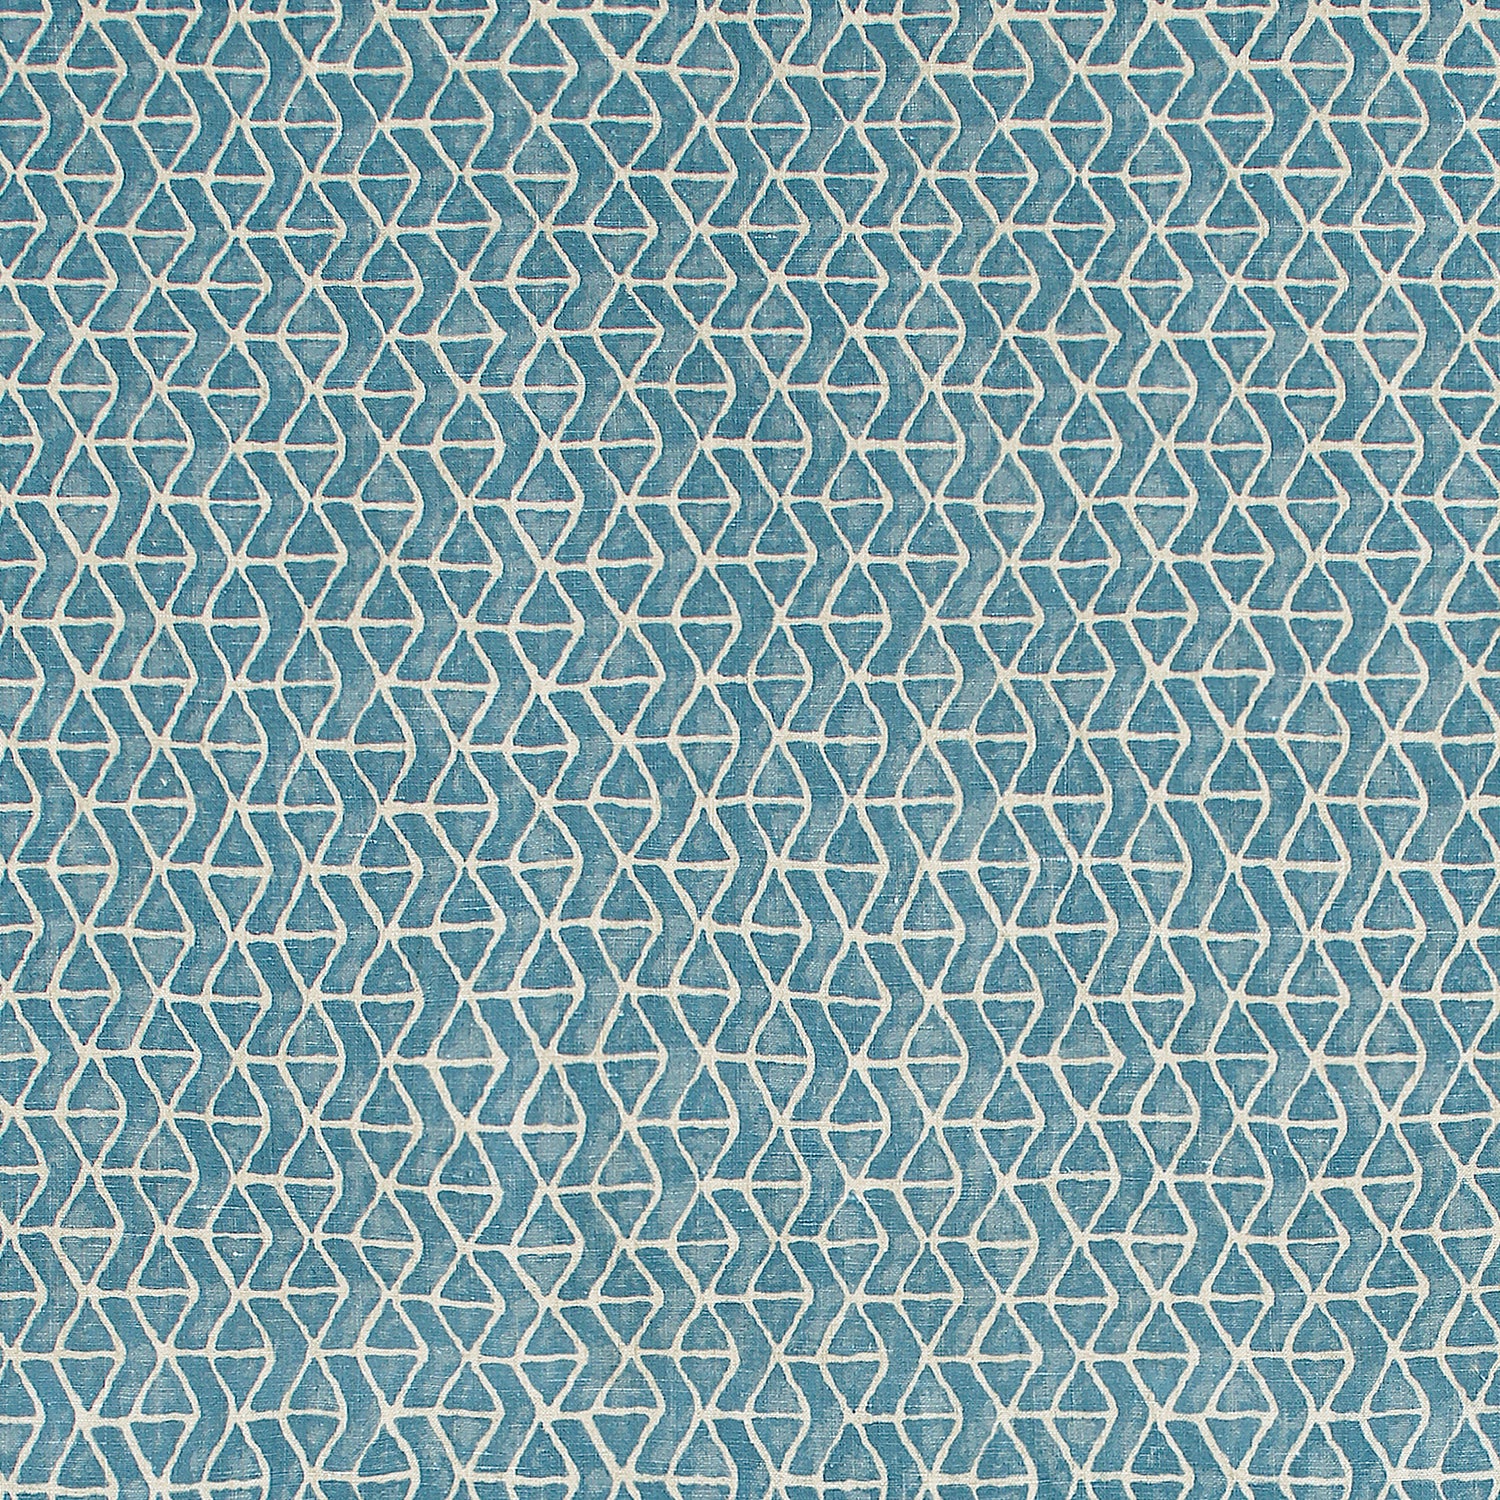 Stony Brook fabric in spa blue color - pattern number F942000 - by Thibaut in the Sojourn collection